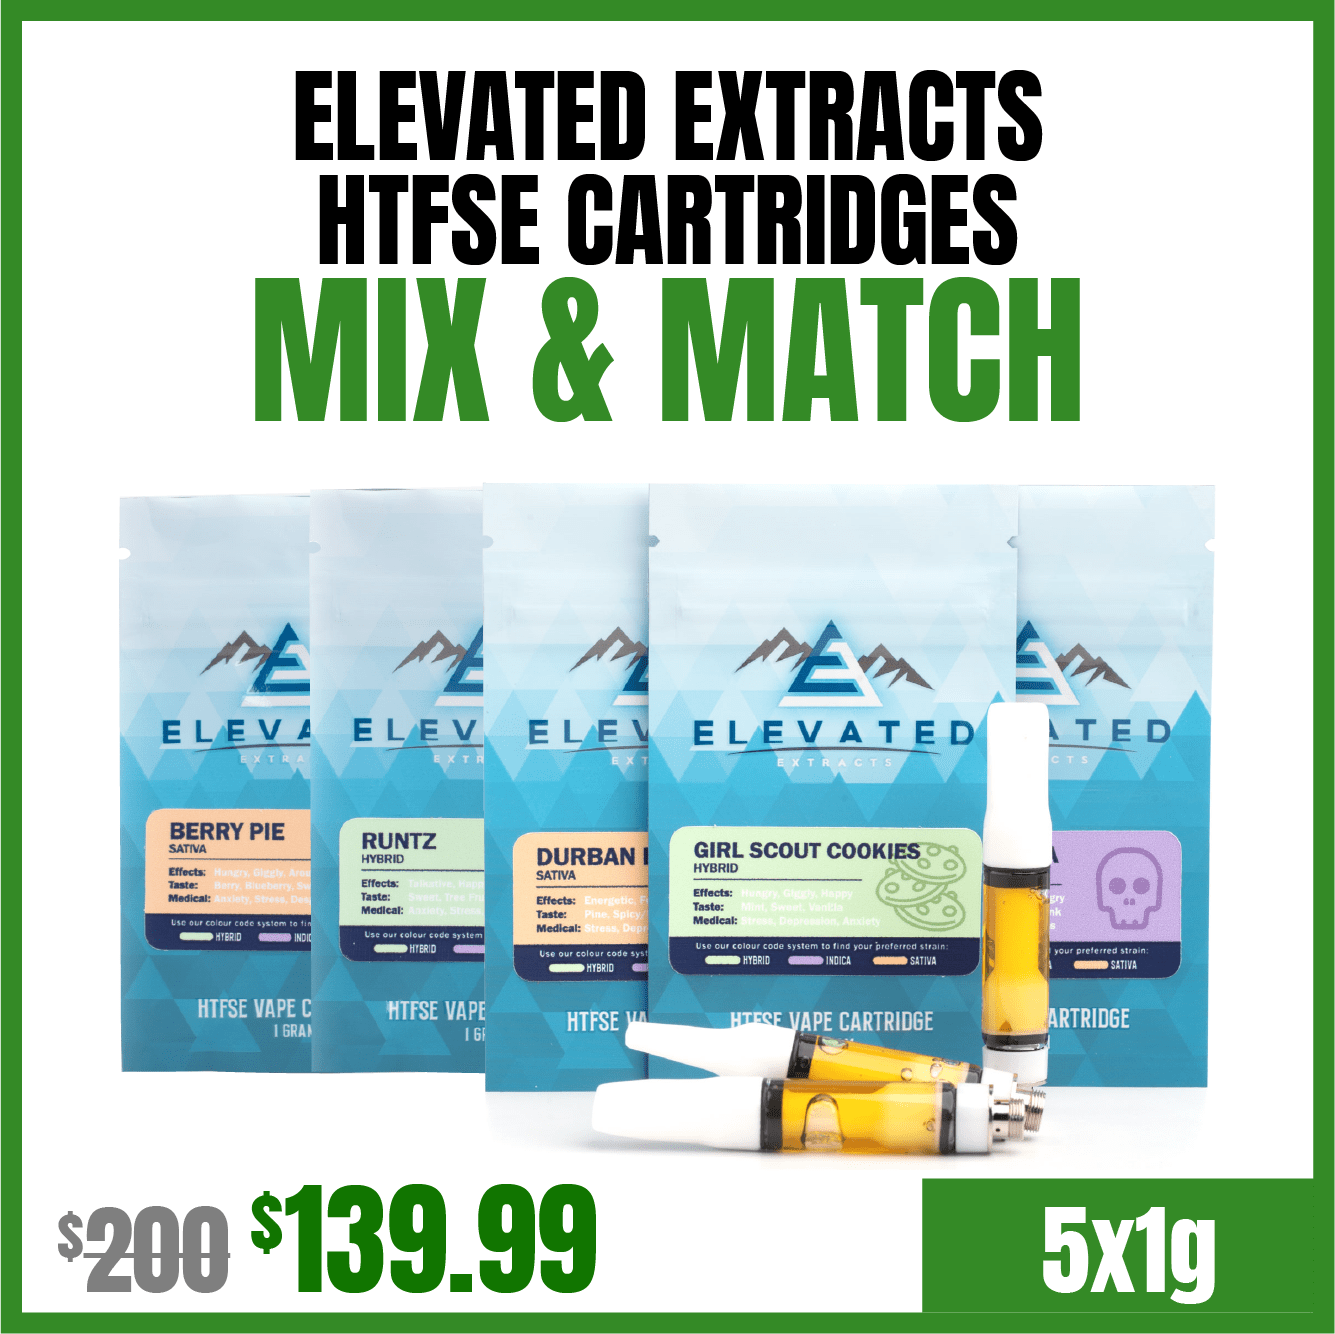 Elevated Extracts HTFSE Cartridges Mix & Match